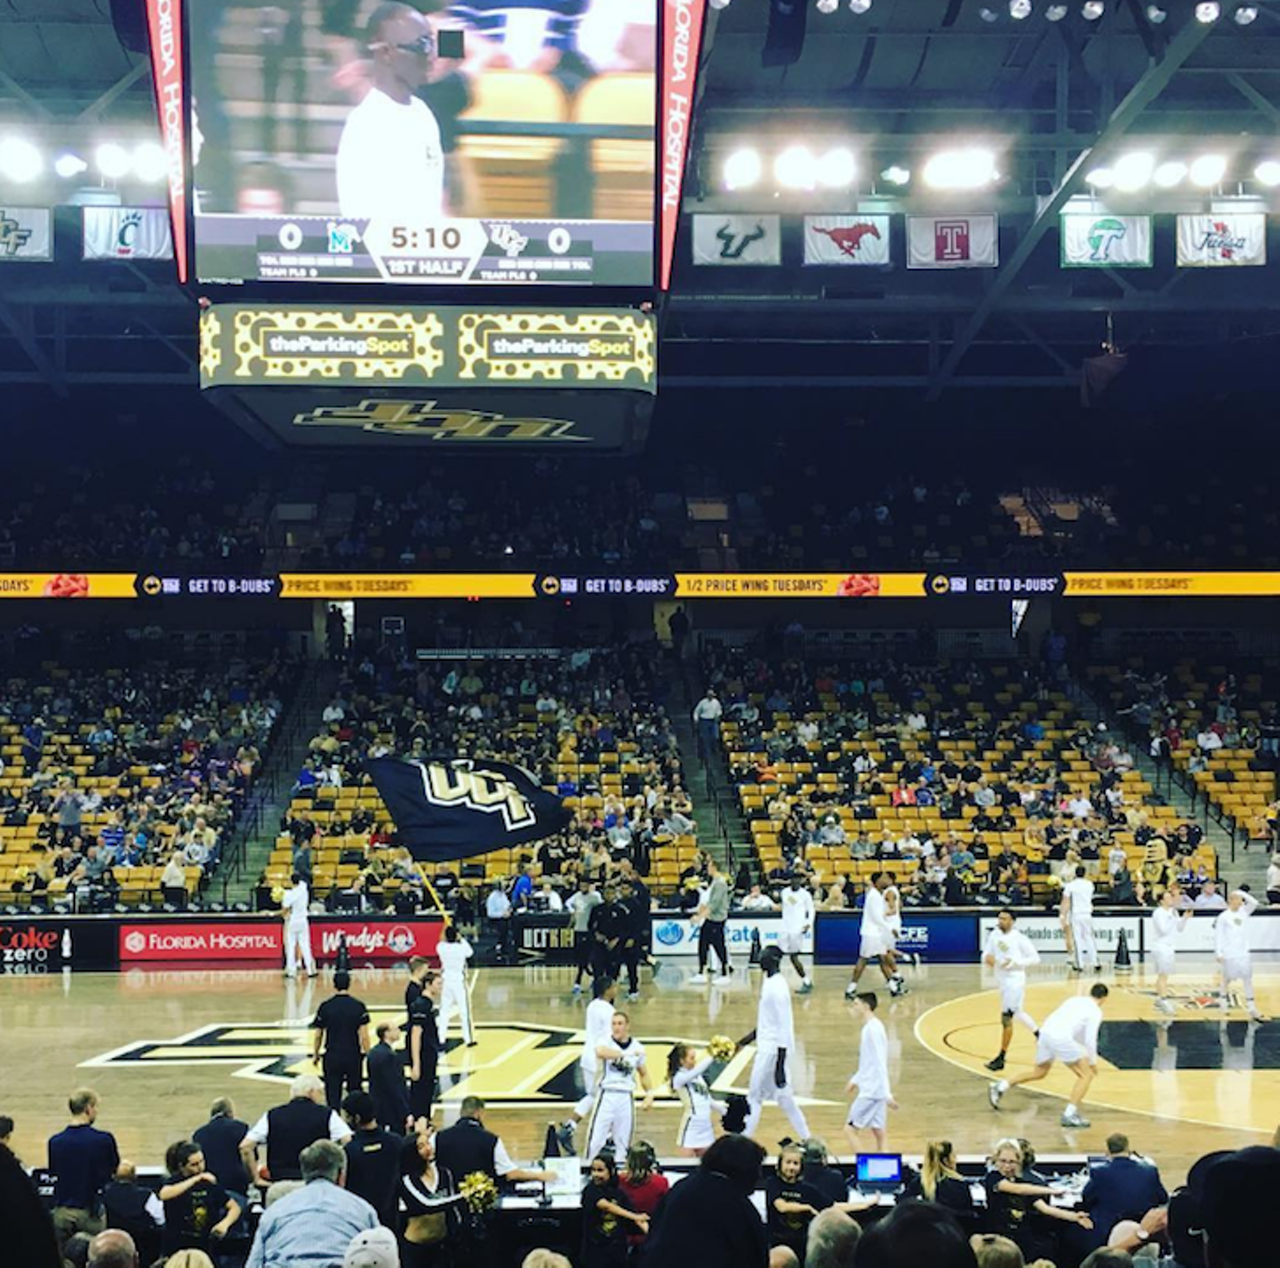  Watch a UCF Basketball Game
Tuesday, February 14, 7 p.m.; CFE Arena, 12777 Gemini Blvd N, Orlando; free with student I.D. or $6
If you want to do something fun and different for Valentine&#146;s but are ballin&#146; on a budget, make like a college student and grab some tickets to a watch the Knights play. Cuddle up on the bleachers and cheer on the Knights as they play Tulsa this V-Day. 
Photo via the.chaaad/Instagram